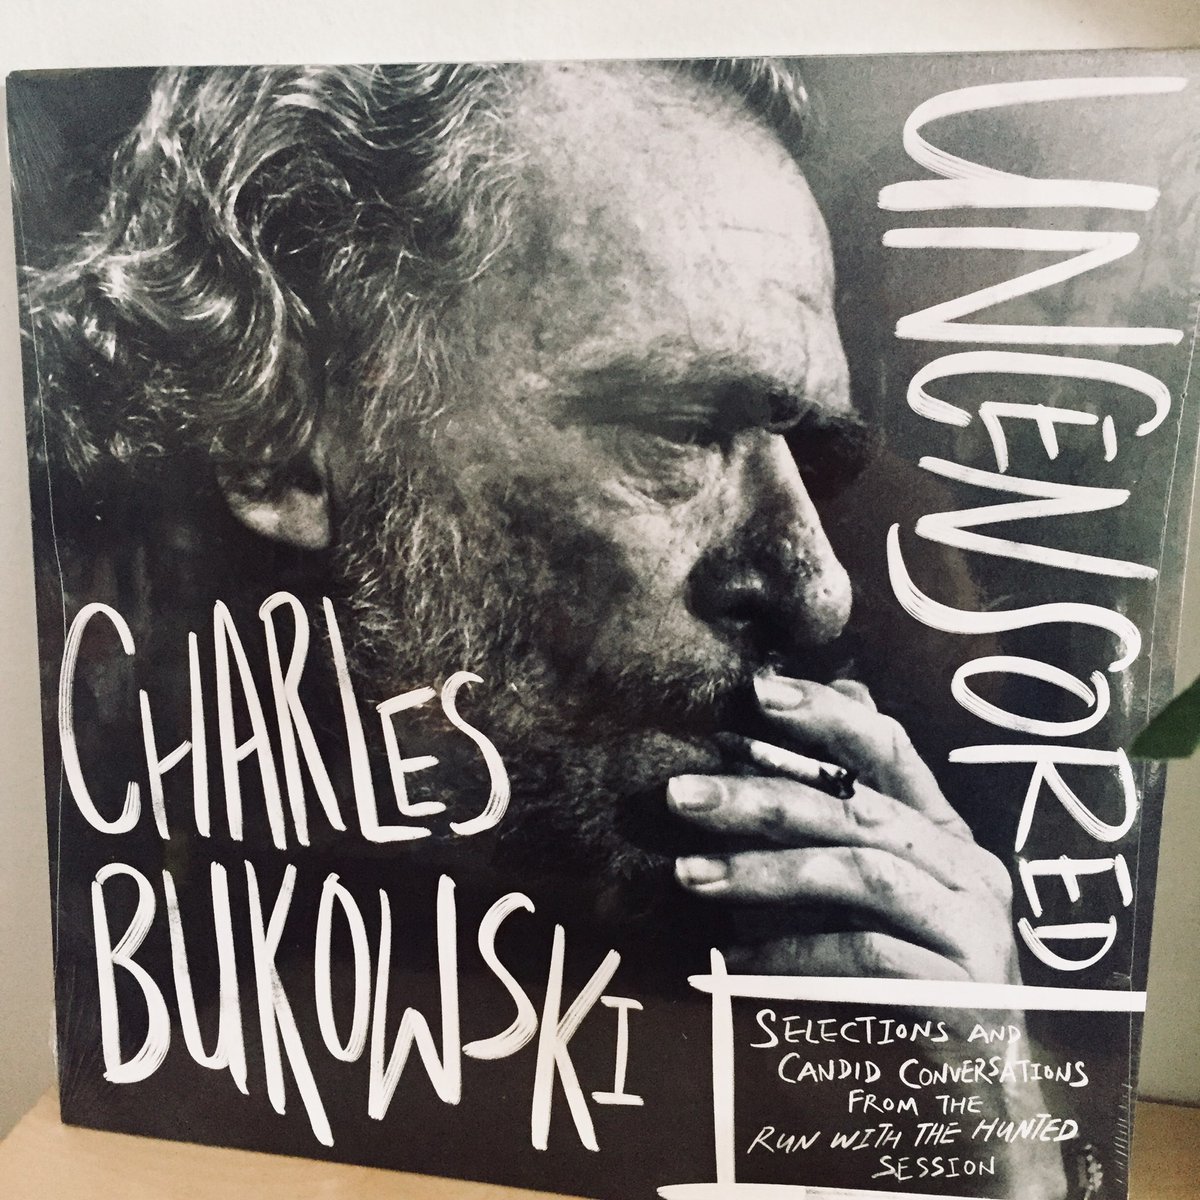 The Catapult's open today from 11-5 for the final day of the #sdbookcrawl! We still have some sweet IBD exclusives like this awesome Bukowski LP available!